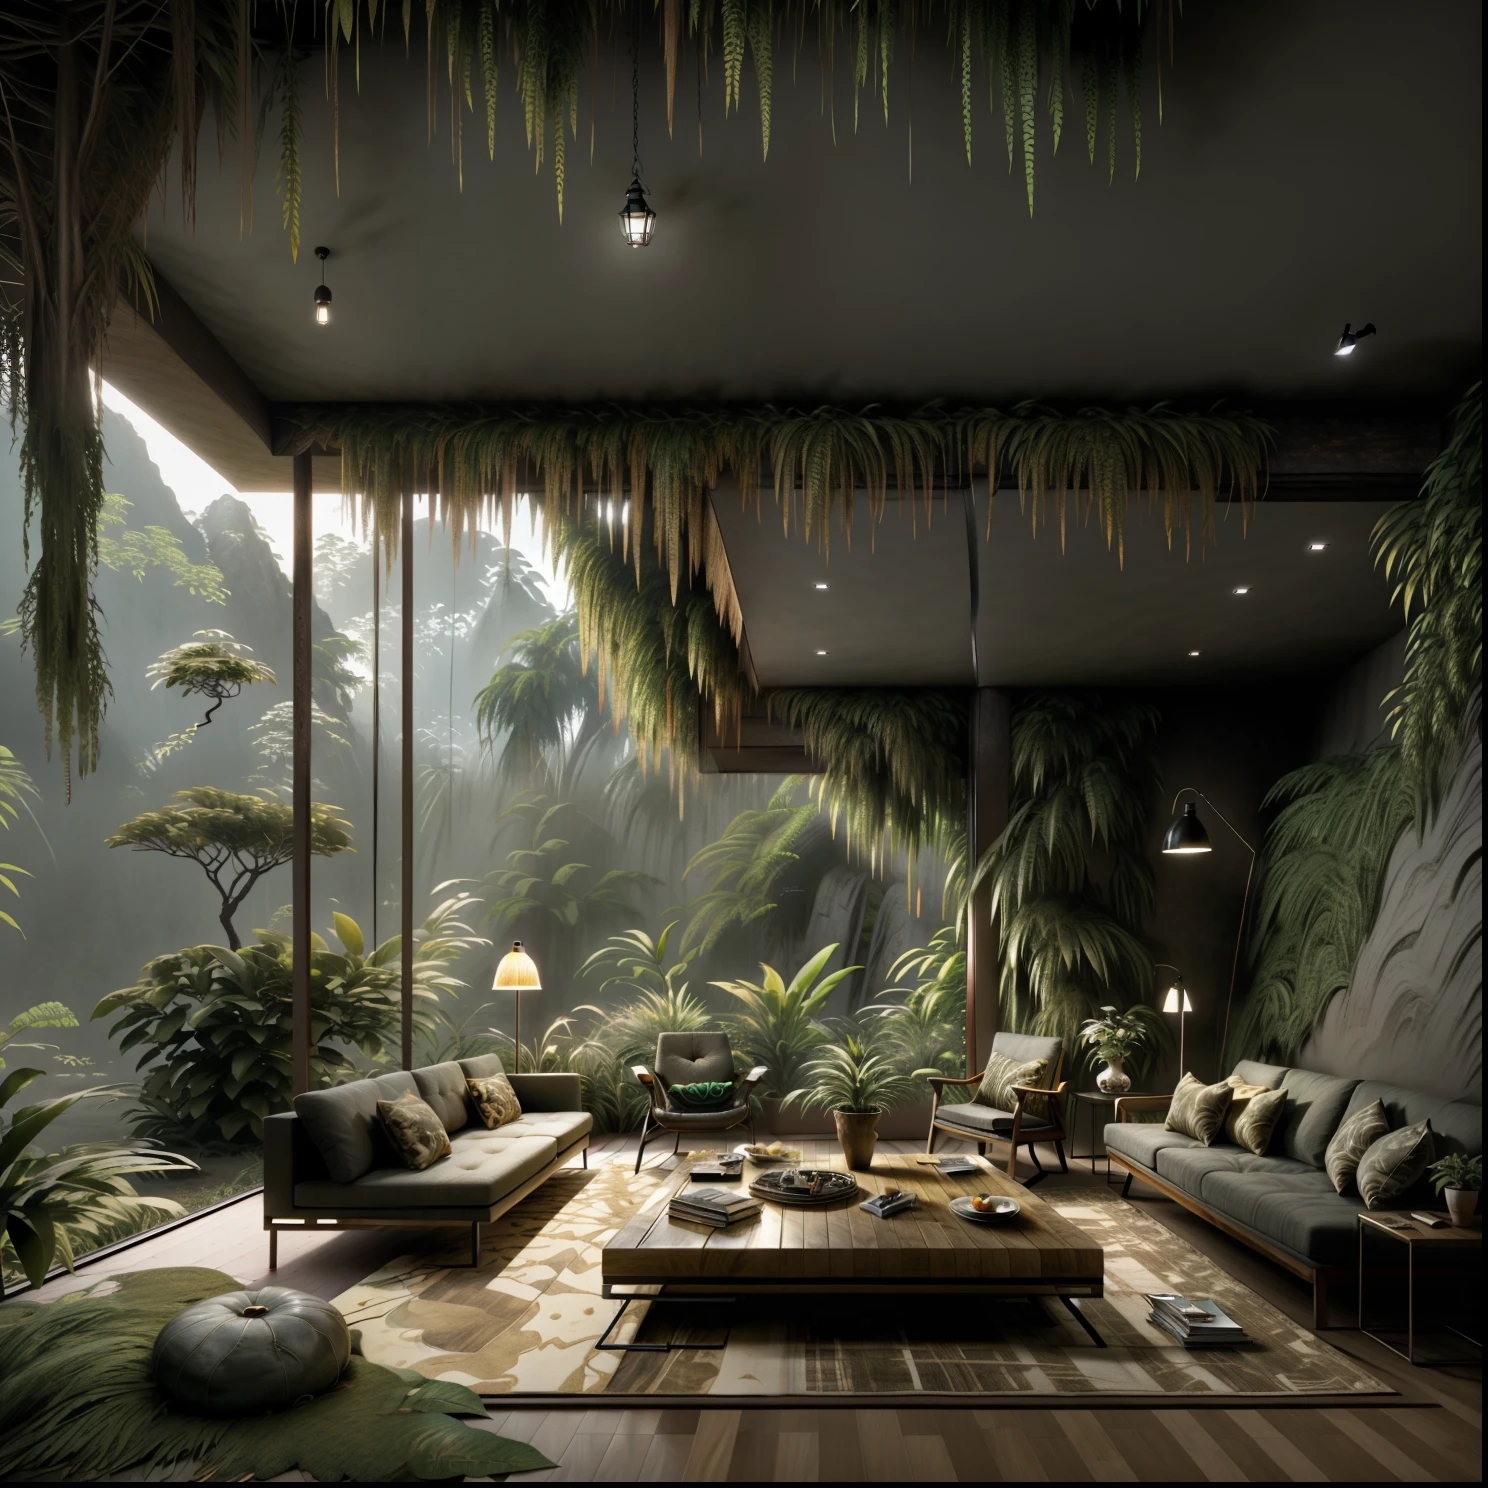 Living room with a large sofa and a table with a lamp, mountainous jungle setting, ambiente relaxante, beautiful render of a landscape, excellent 3d render, natureza encontra arquitetura, realistic fantasy rendering, magical atmosphere, jungle setting, Casa na floresta, integrado nas montanhas, arquitetura realista, construir em uma floresta perto de um lago, enscape render